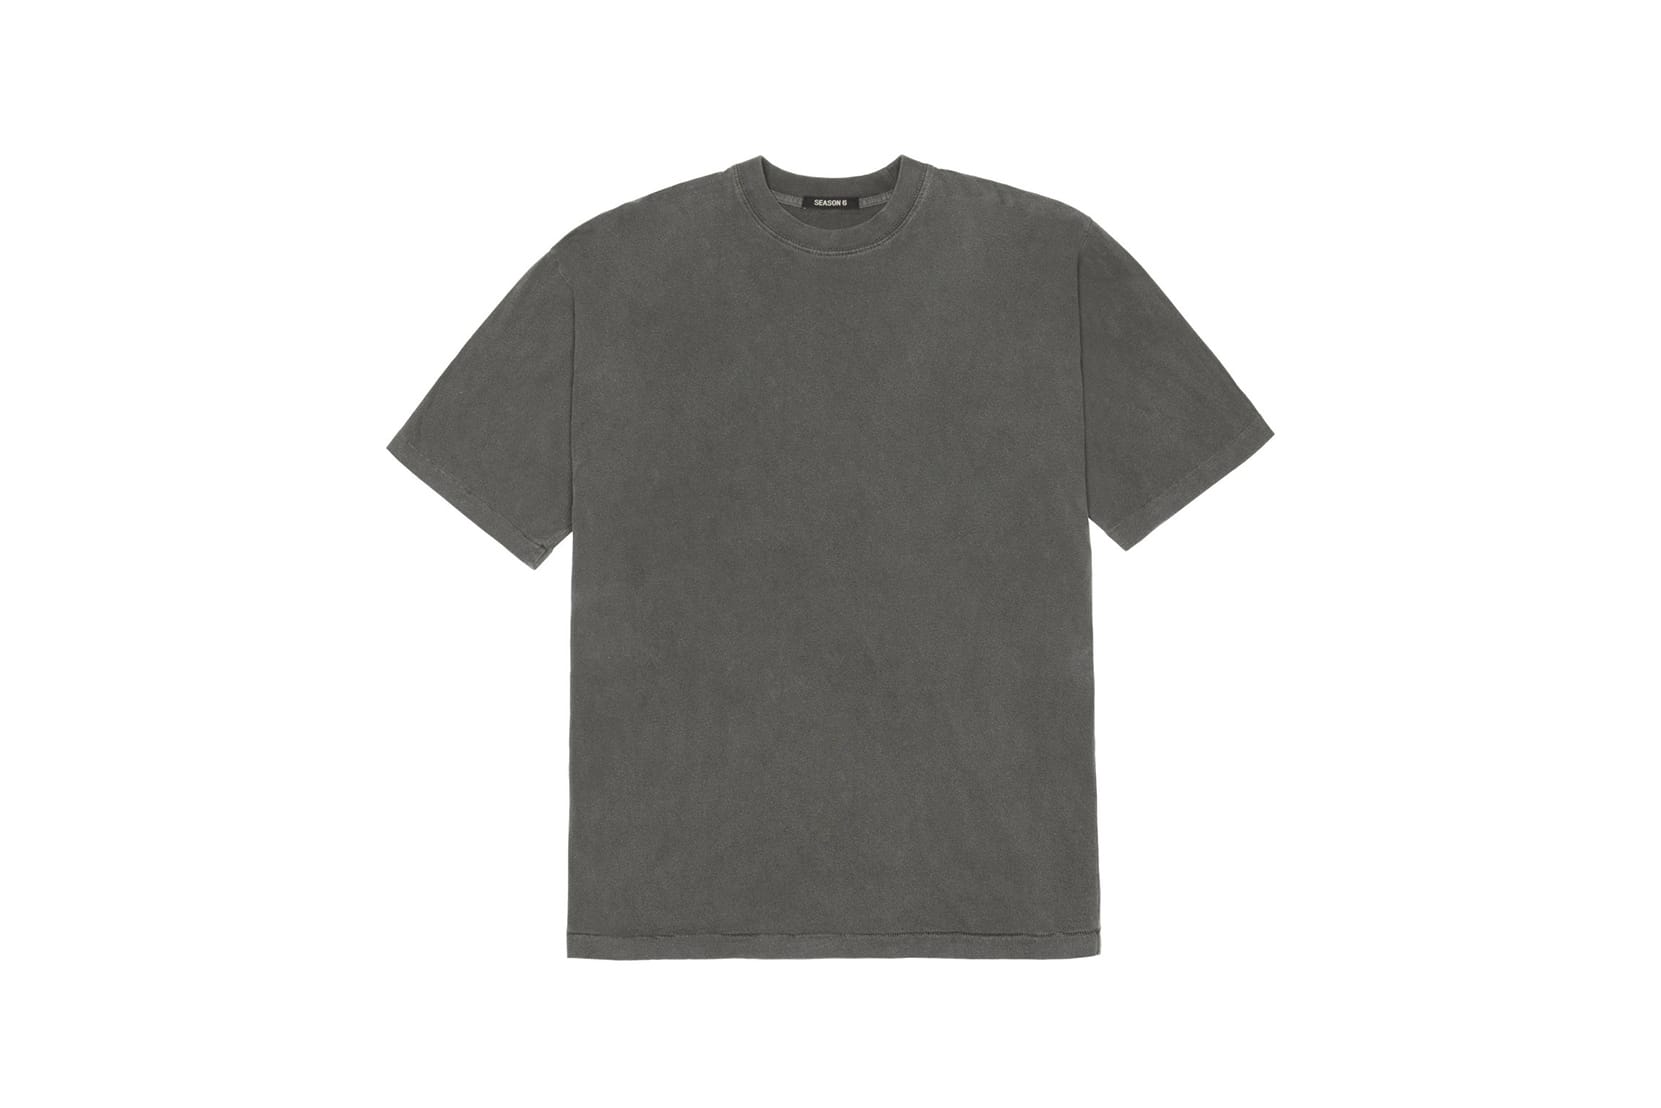 YEEZY Season 6 Pieces are Available 